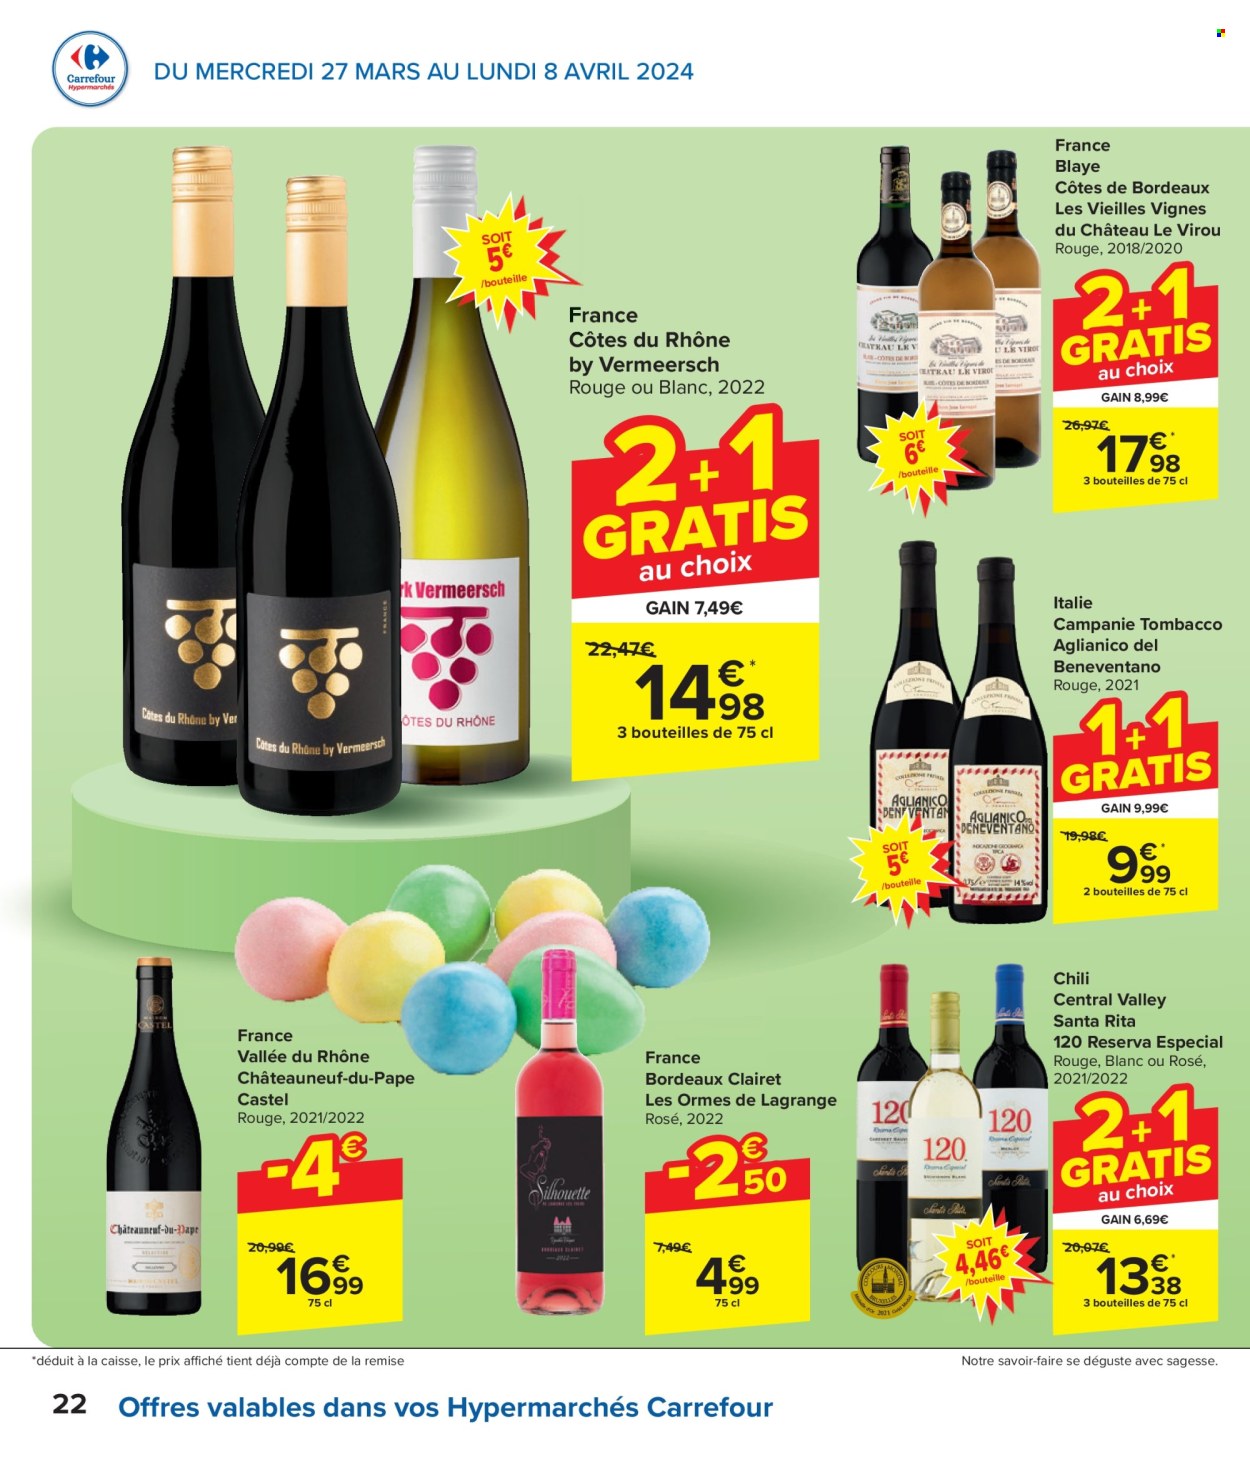 Catalogue Carrefour hypermarkt - 27.3.2024 - 8.4.2024. Page 22.